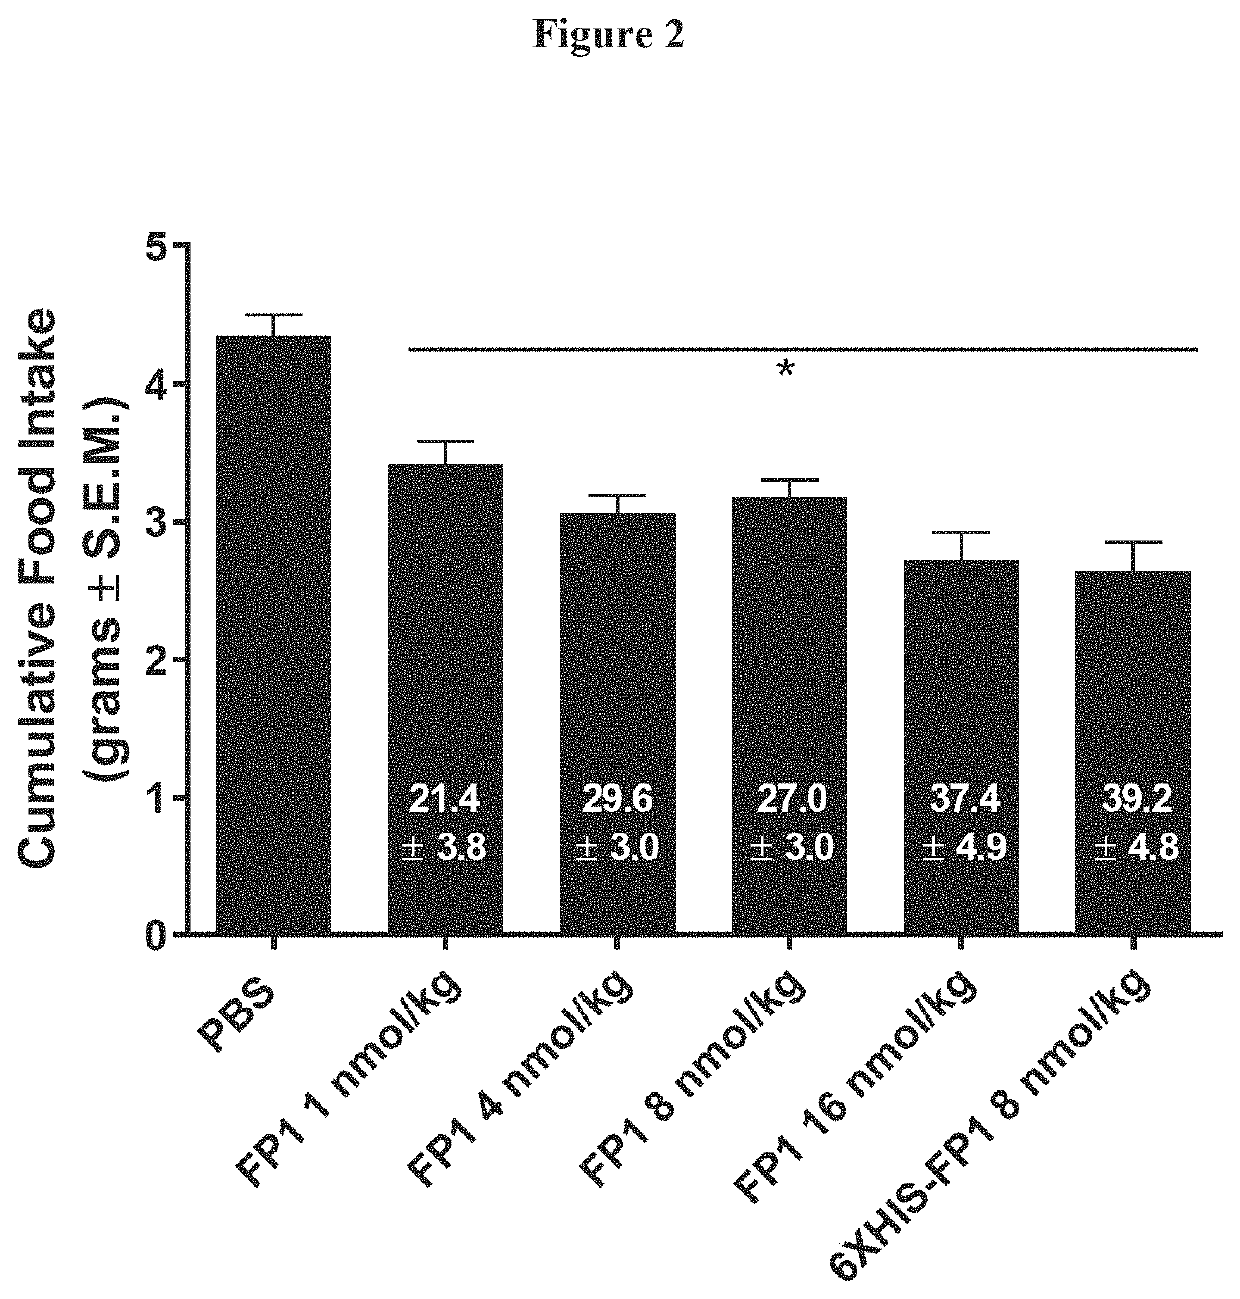 Gdf15 analogs and methods for use in decreasing body weight and/or reducing food intake